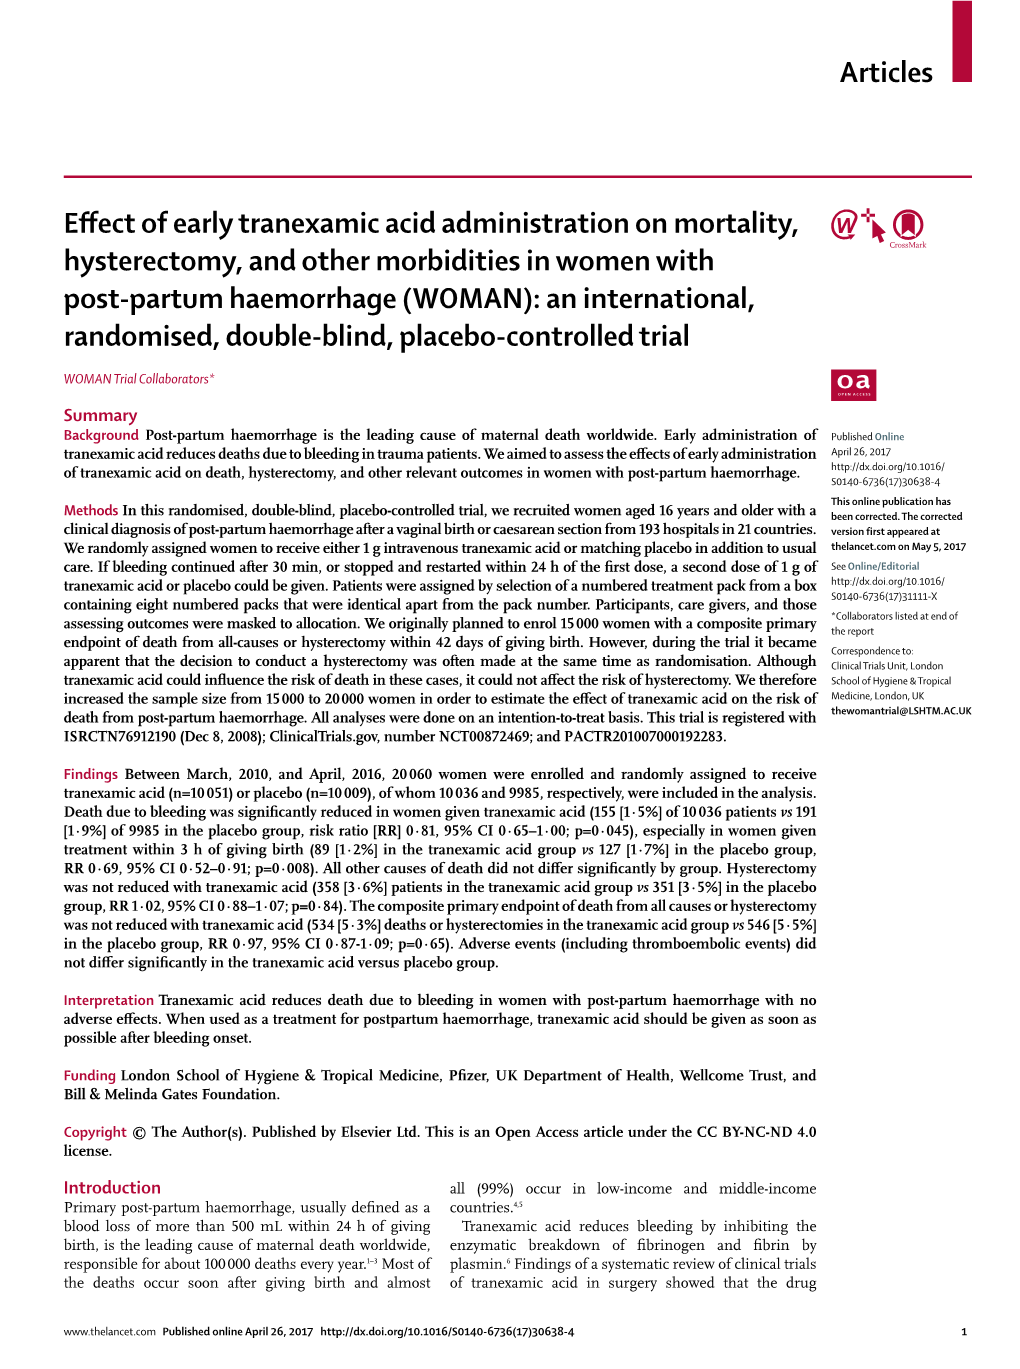 Effect of Early Tranexamic Acid Administration on Mortality